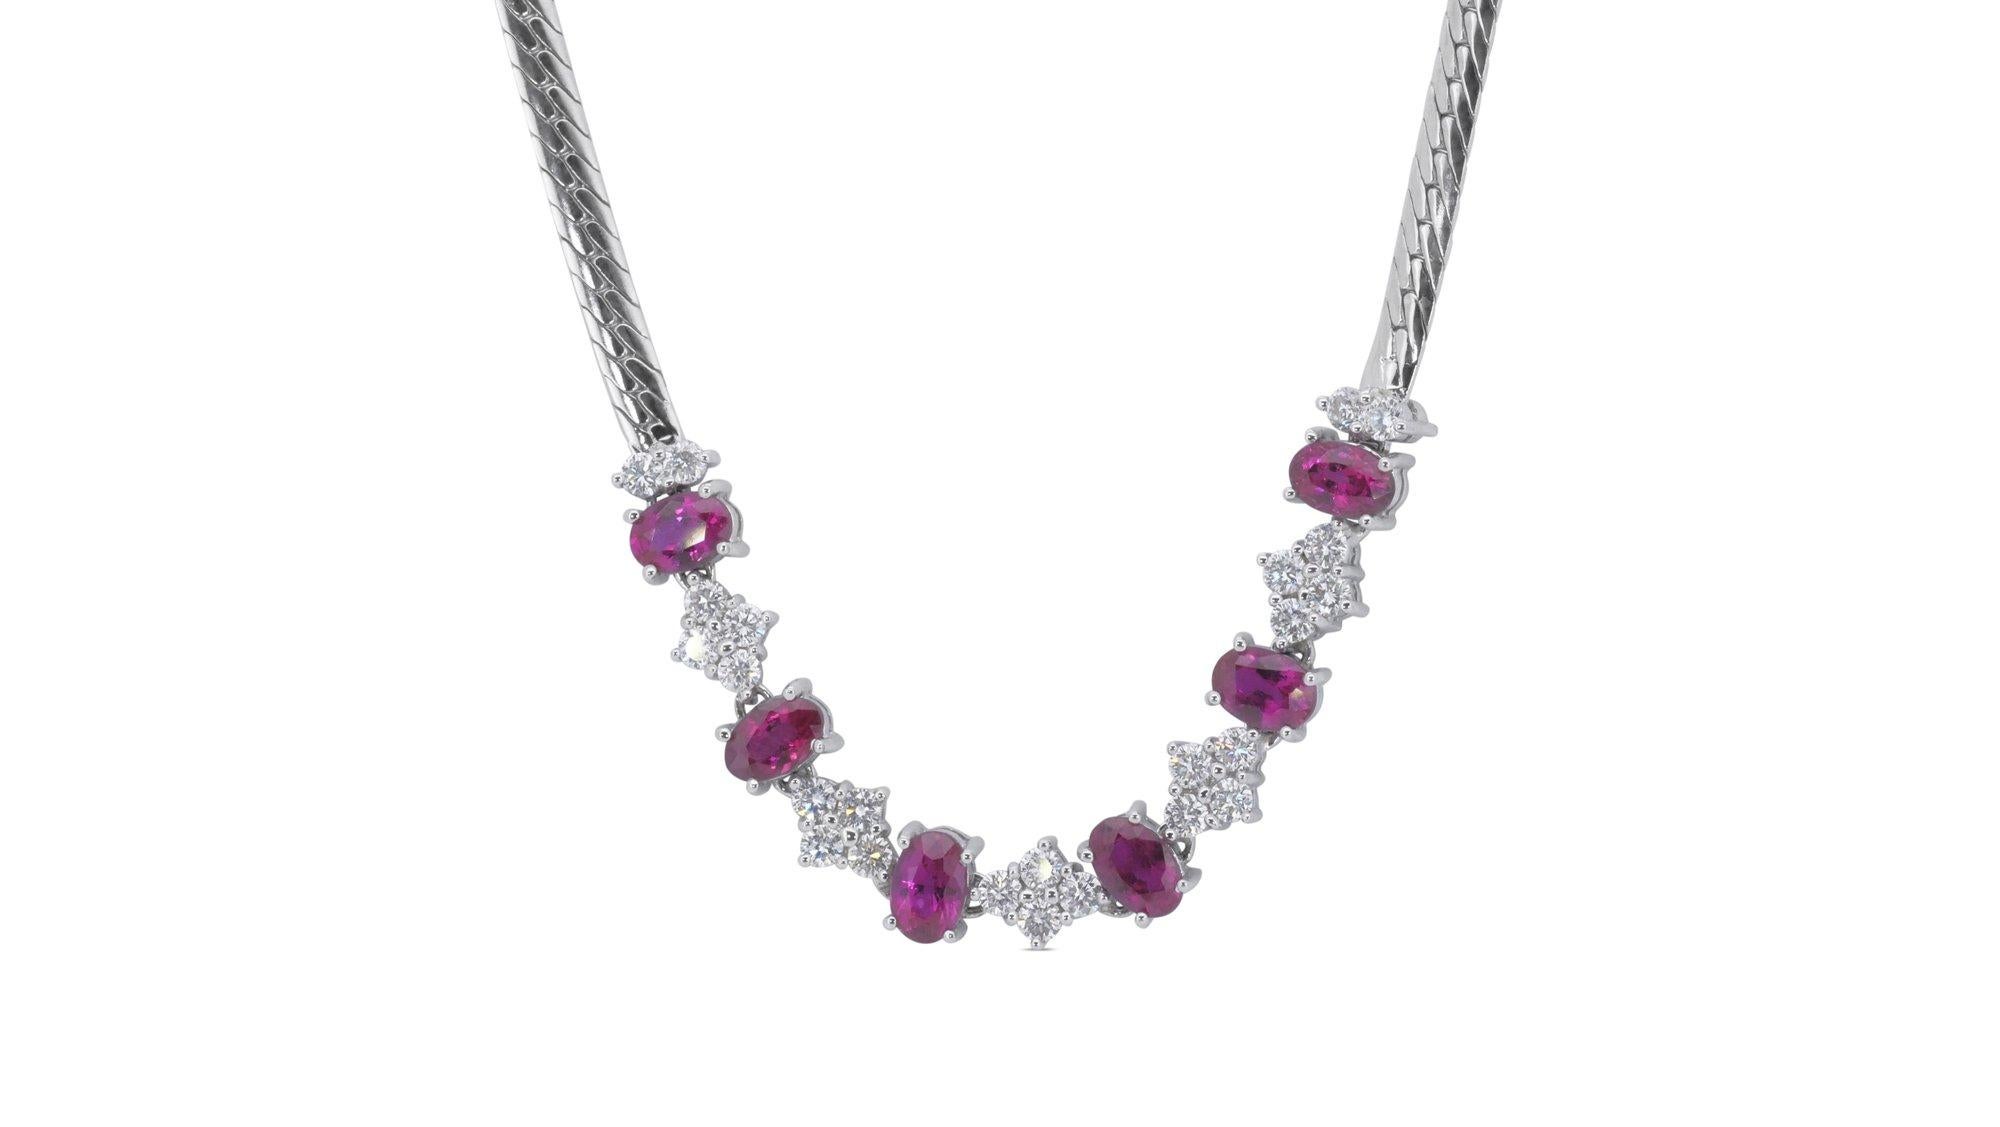 Dazzling 18k White Gold Necklace w/ 2.85ct Rubies and Natural Diamonds IGI Cert 2